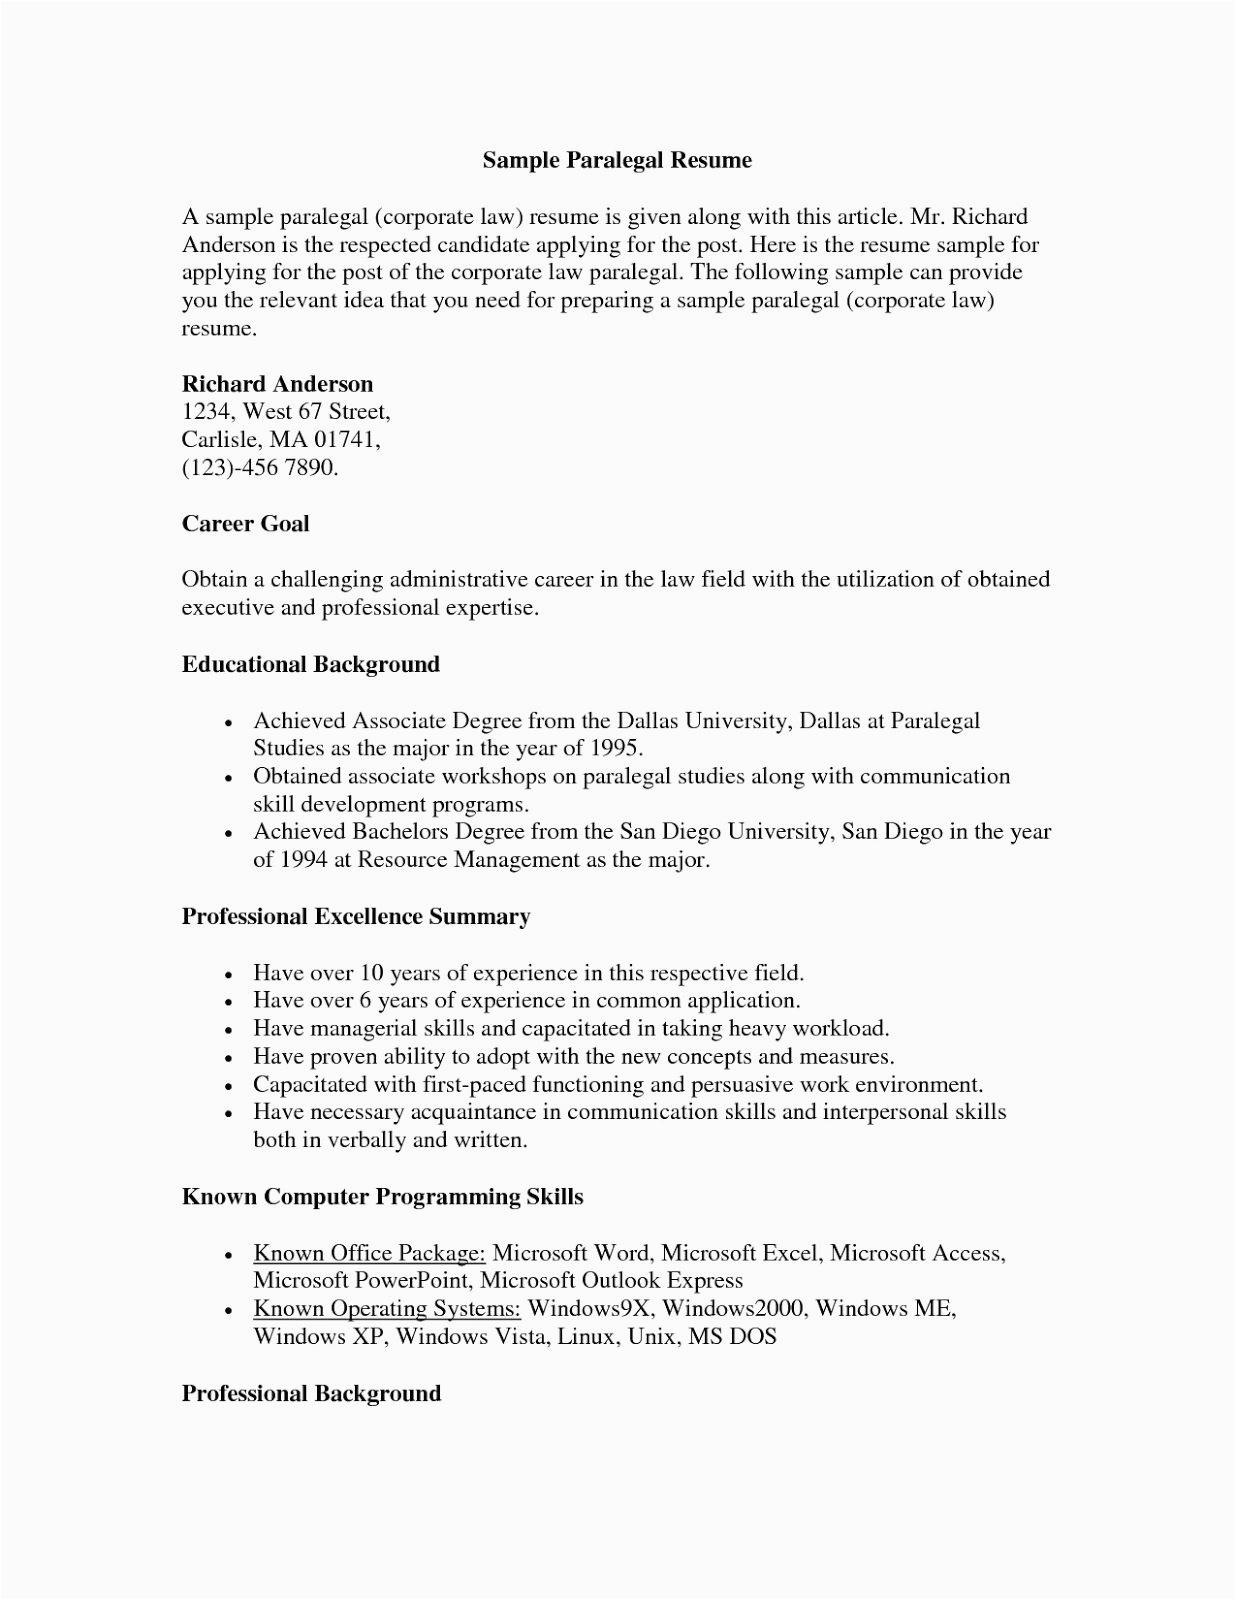 Sample Resume for Paralegal with No Experience Paralegal Resume Sample Paralegal Resume Samples